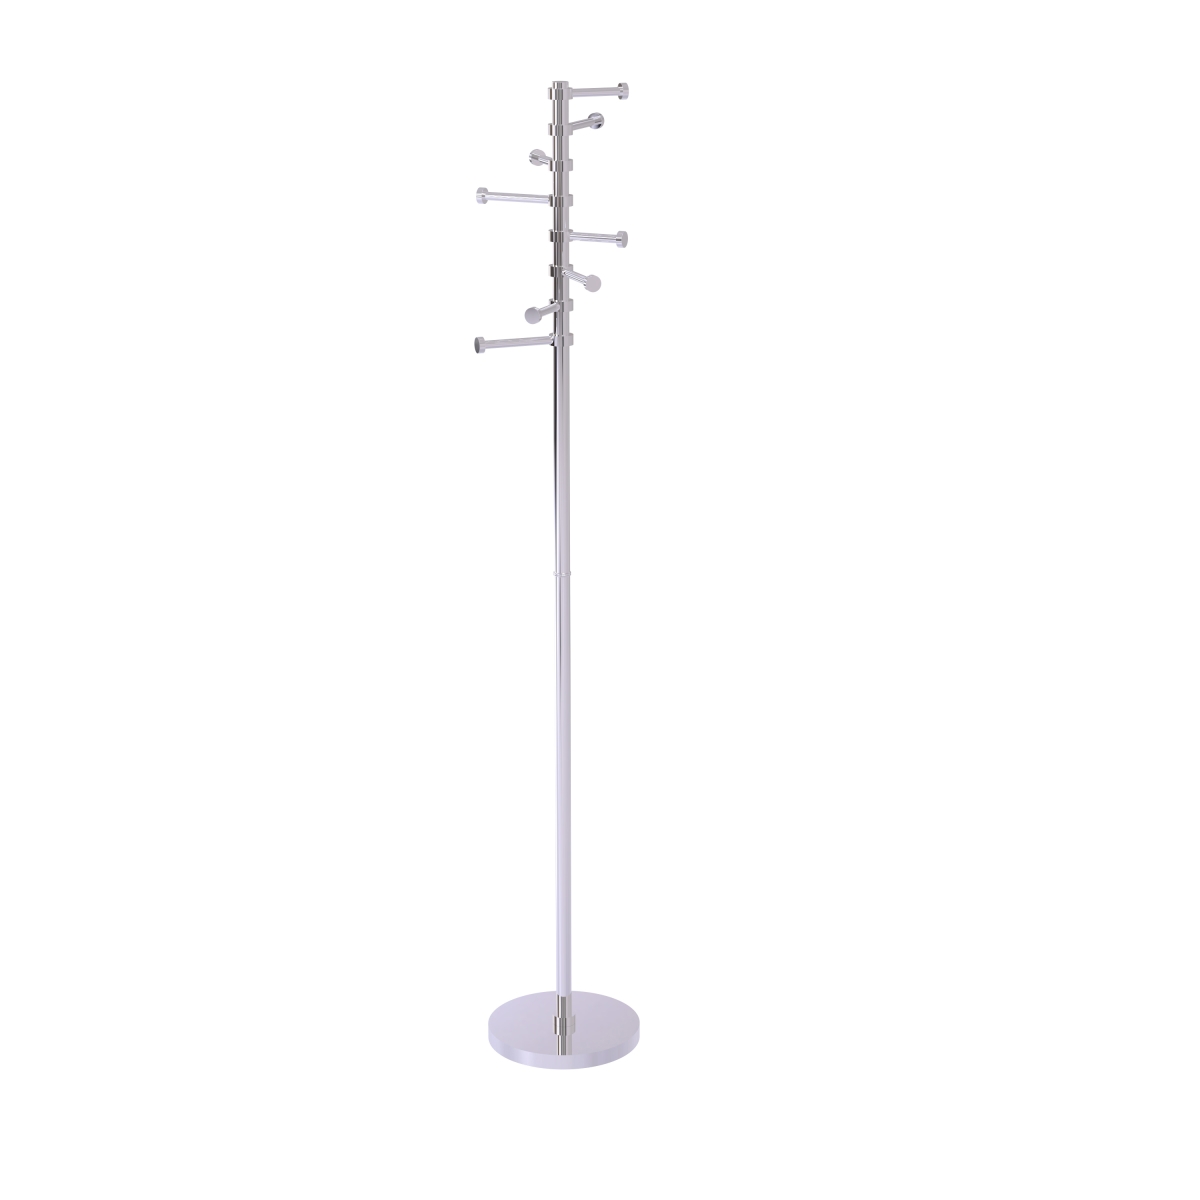 Picture of Allied Brass CS-1-PC Free Standing Coat Rack with Six Pivoting Pegs, Polished Chrome